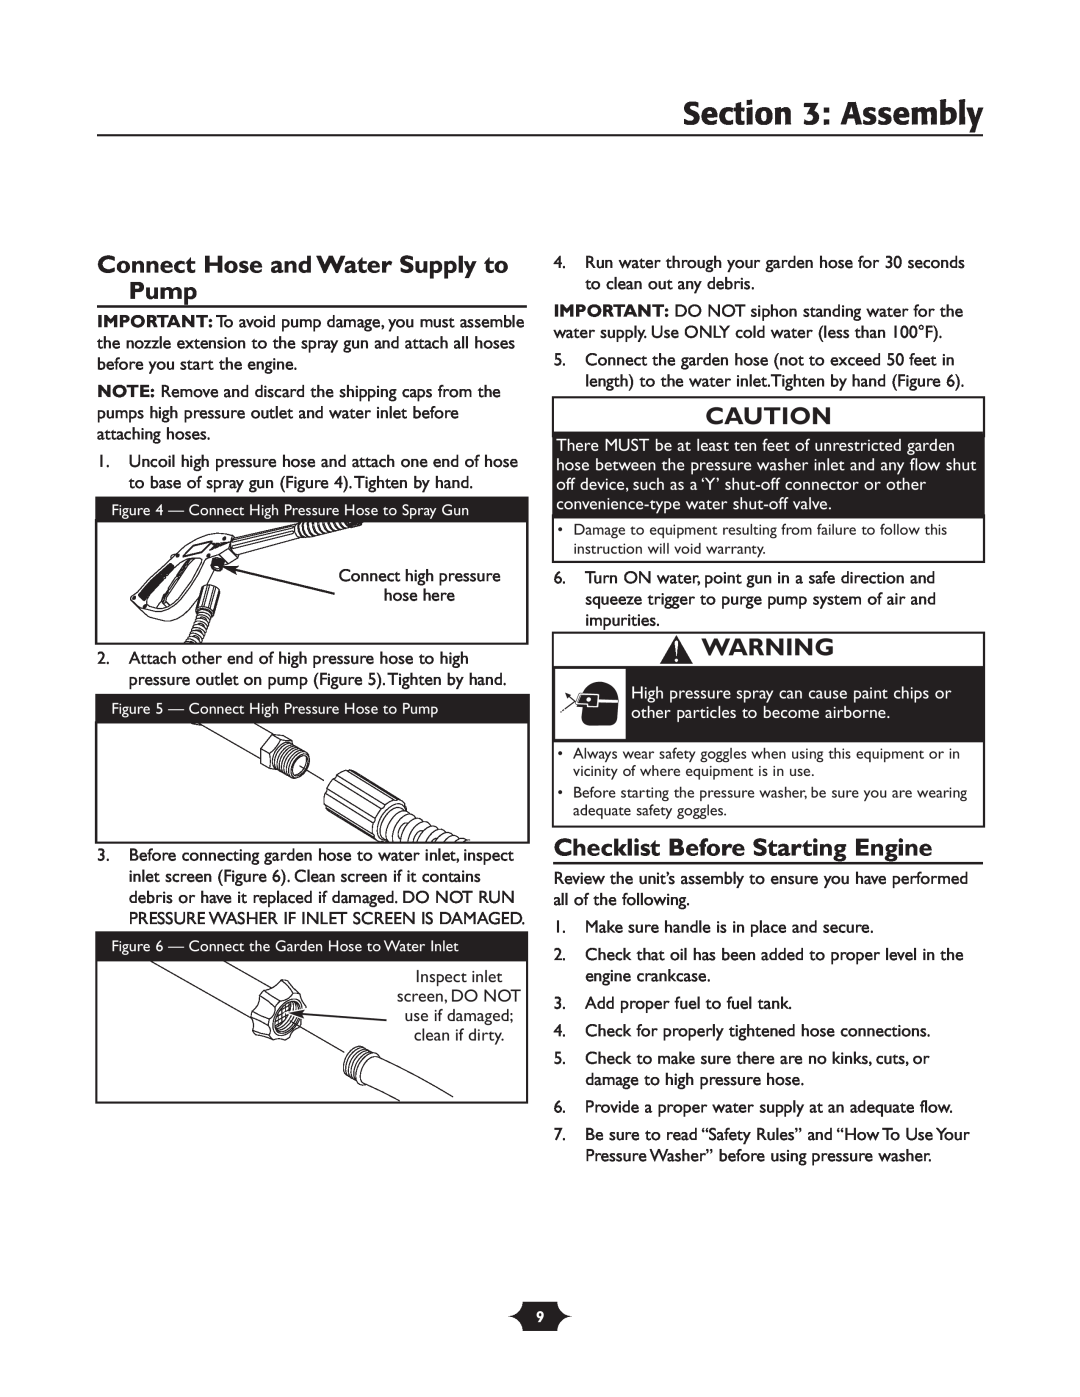 Briggs & Stratton 20270 Connect Hose and Water Supply to Pump, Checklist Before Starting Engine, Assembly 